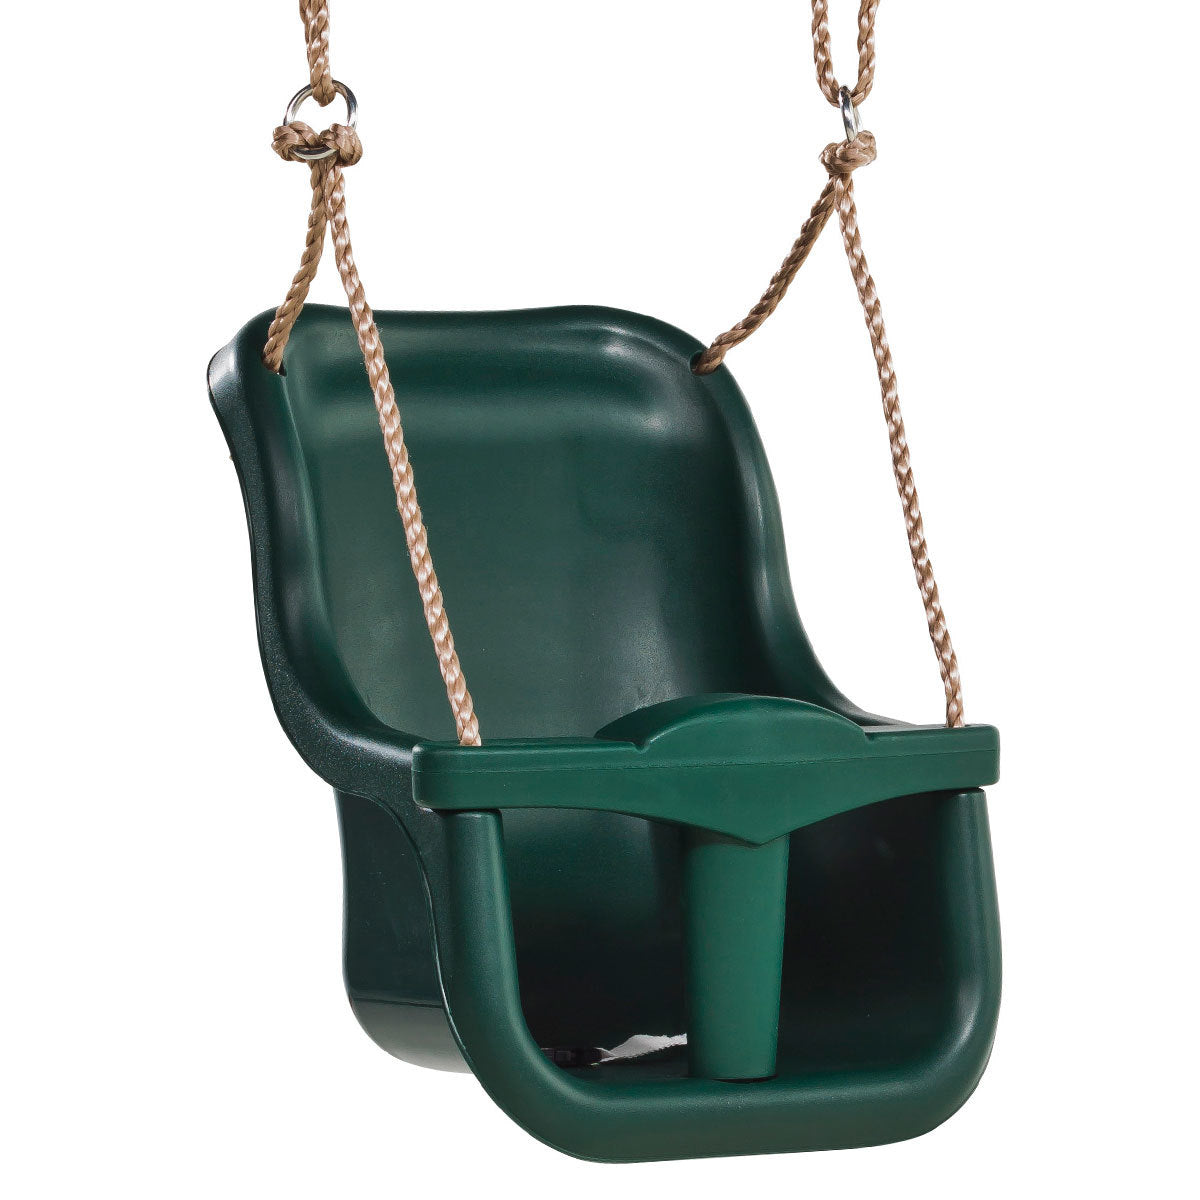 2-part-green-baby-swing-seat-with-pp-ropes